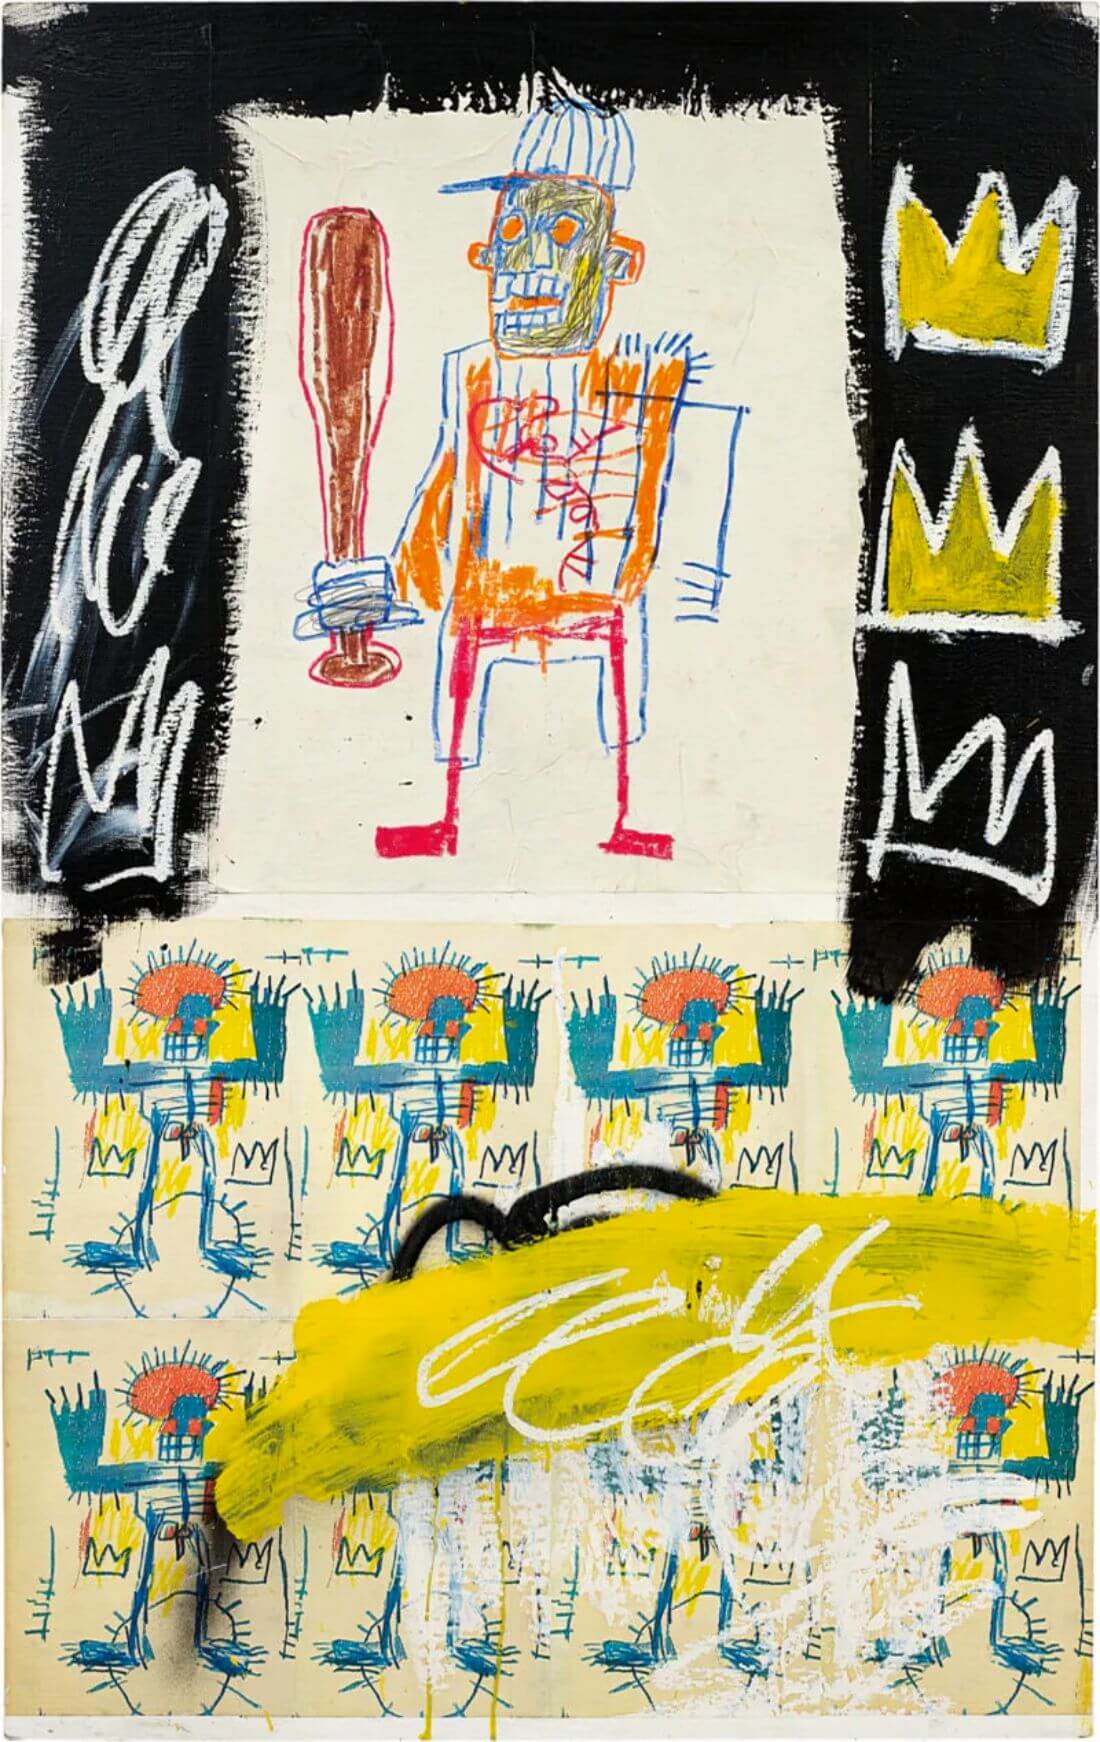 Neron ART - Jean-Michel Basquiat Net Weight 1981 - Original Graffiti Art  Canvas Paintings Hand Painted Reproduction Rolled - 120X100 cm (approx.  48X40 inch) for Wall Decoration …  ASIN: B06XYKQQX3